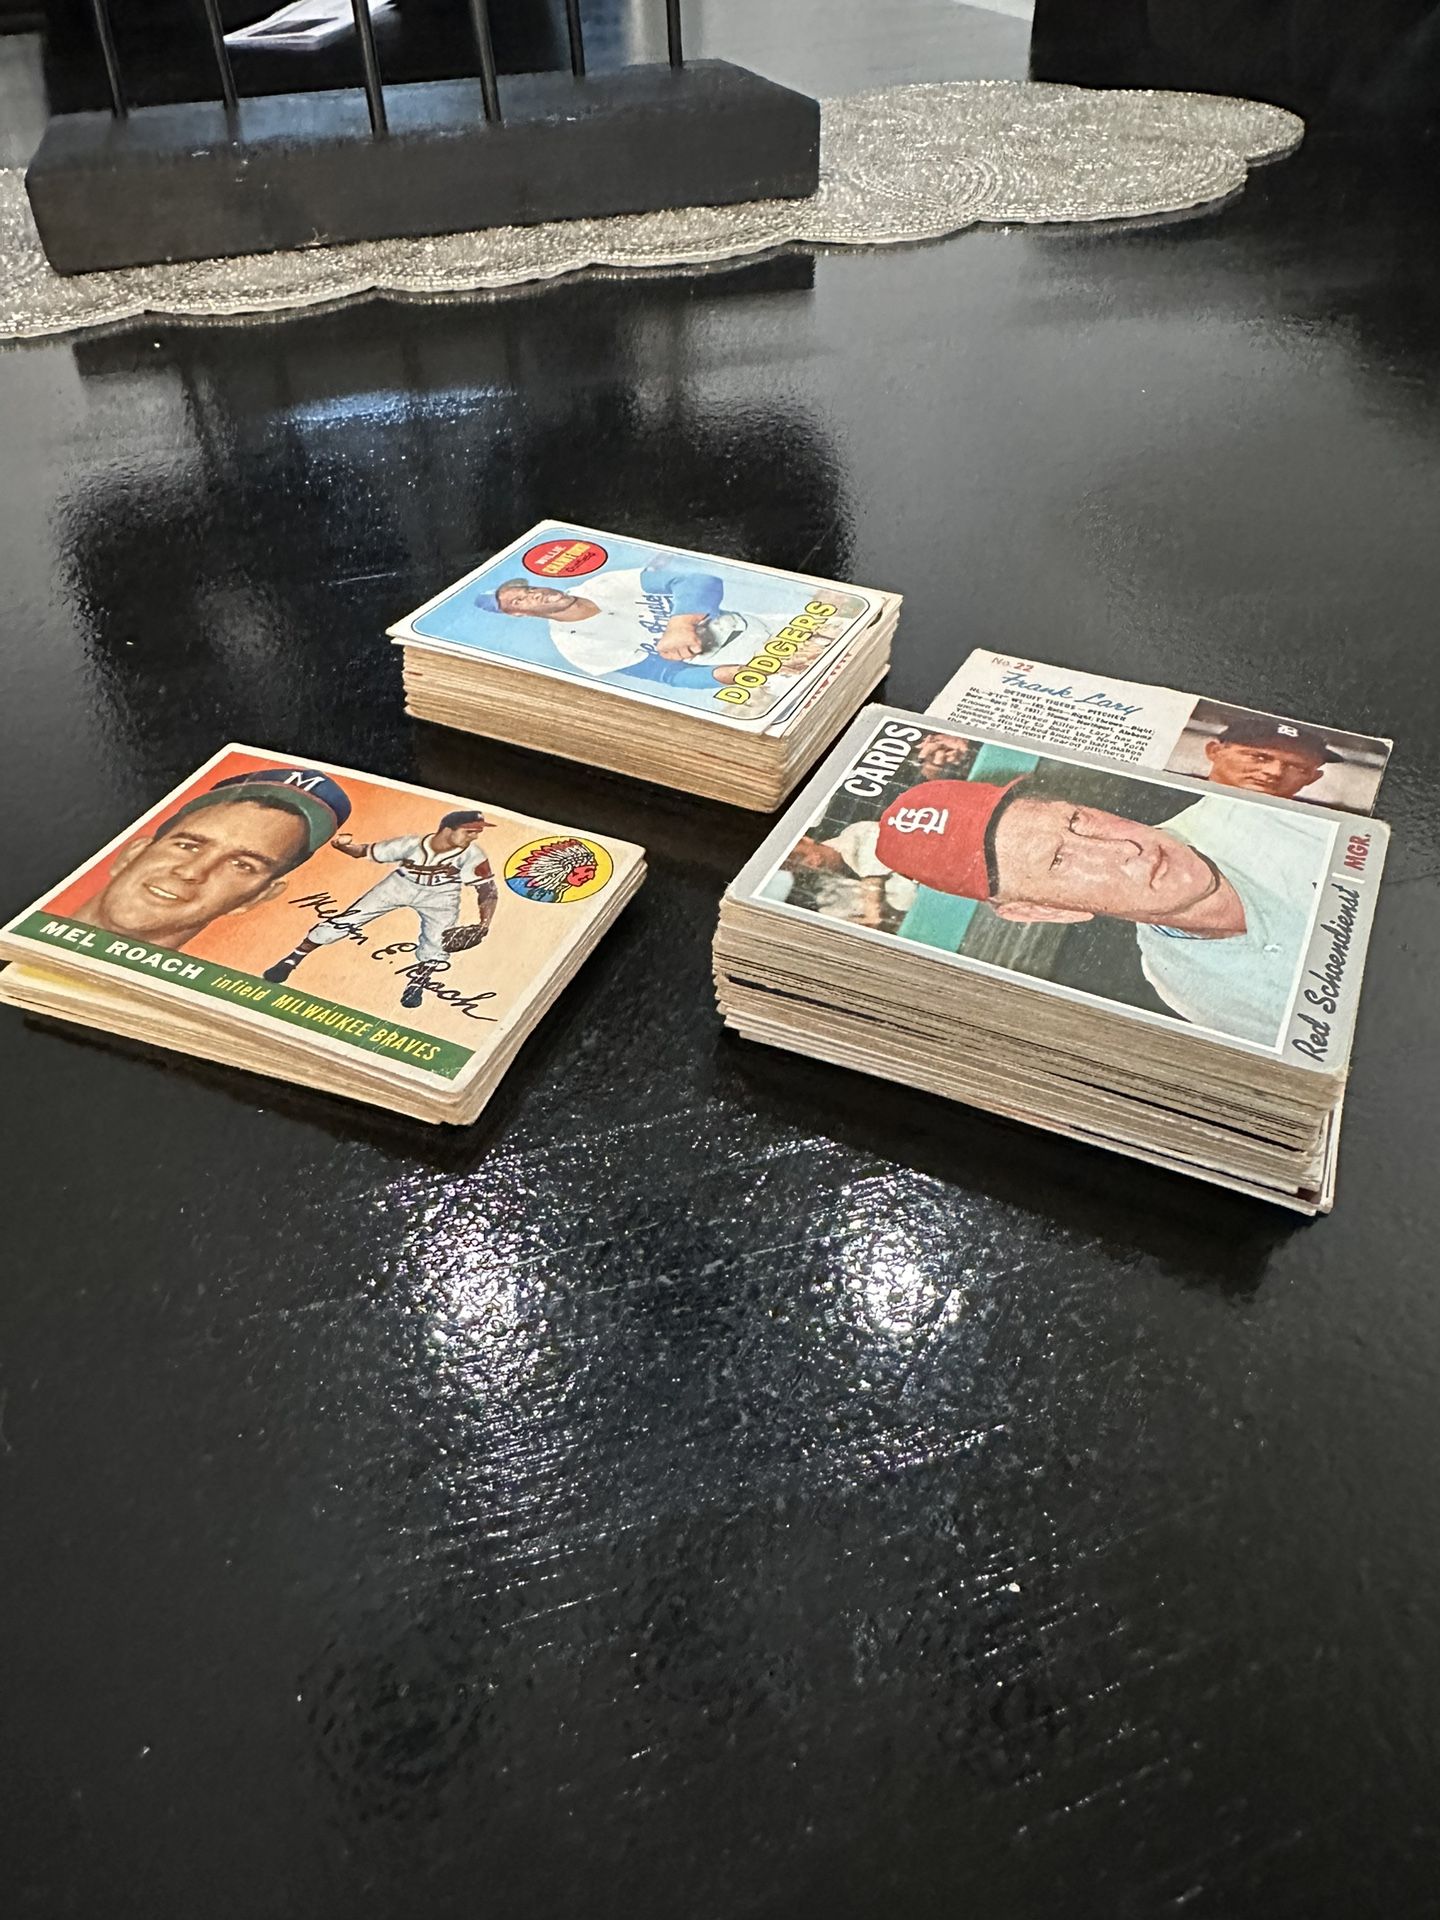 Lot Of 100 Vintage MLB Baseball Cards 1950’s To 1970’s